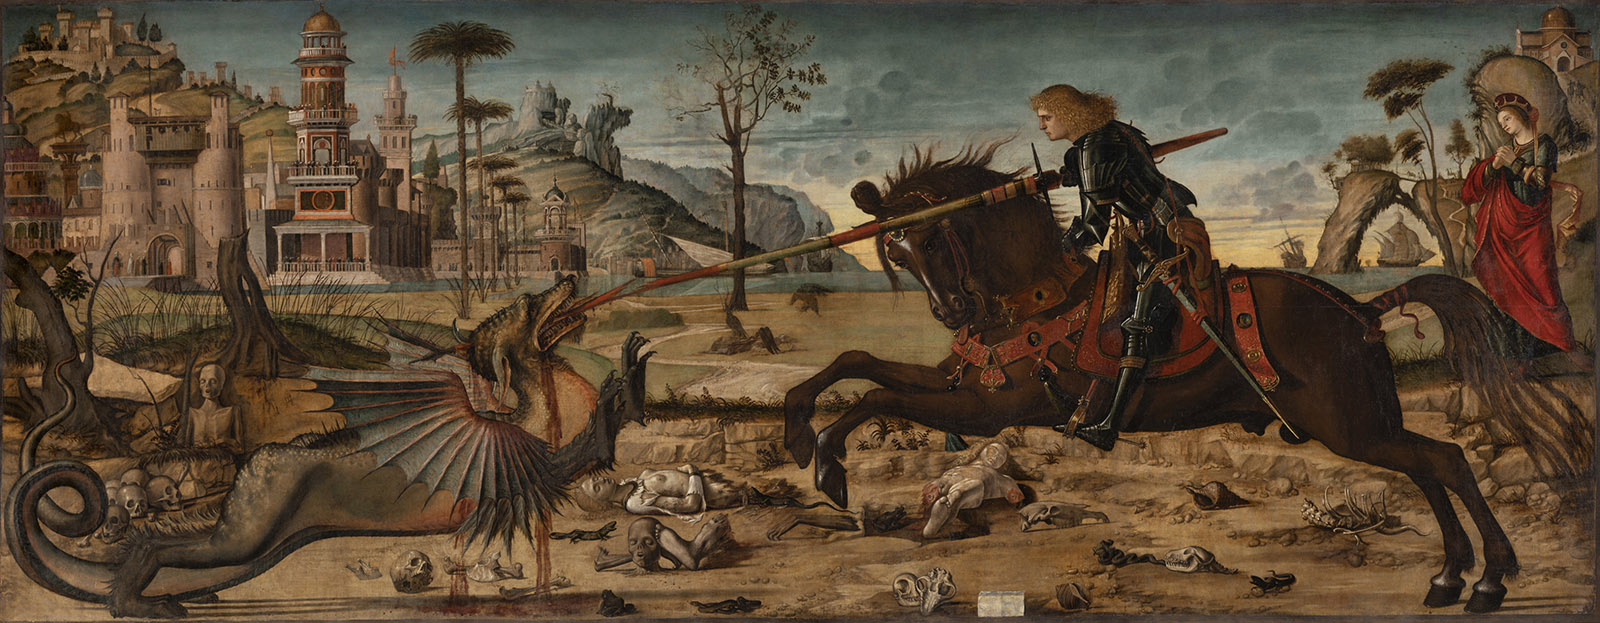 Saint George and the Dragon; painting by Vittore Carpaccio